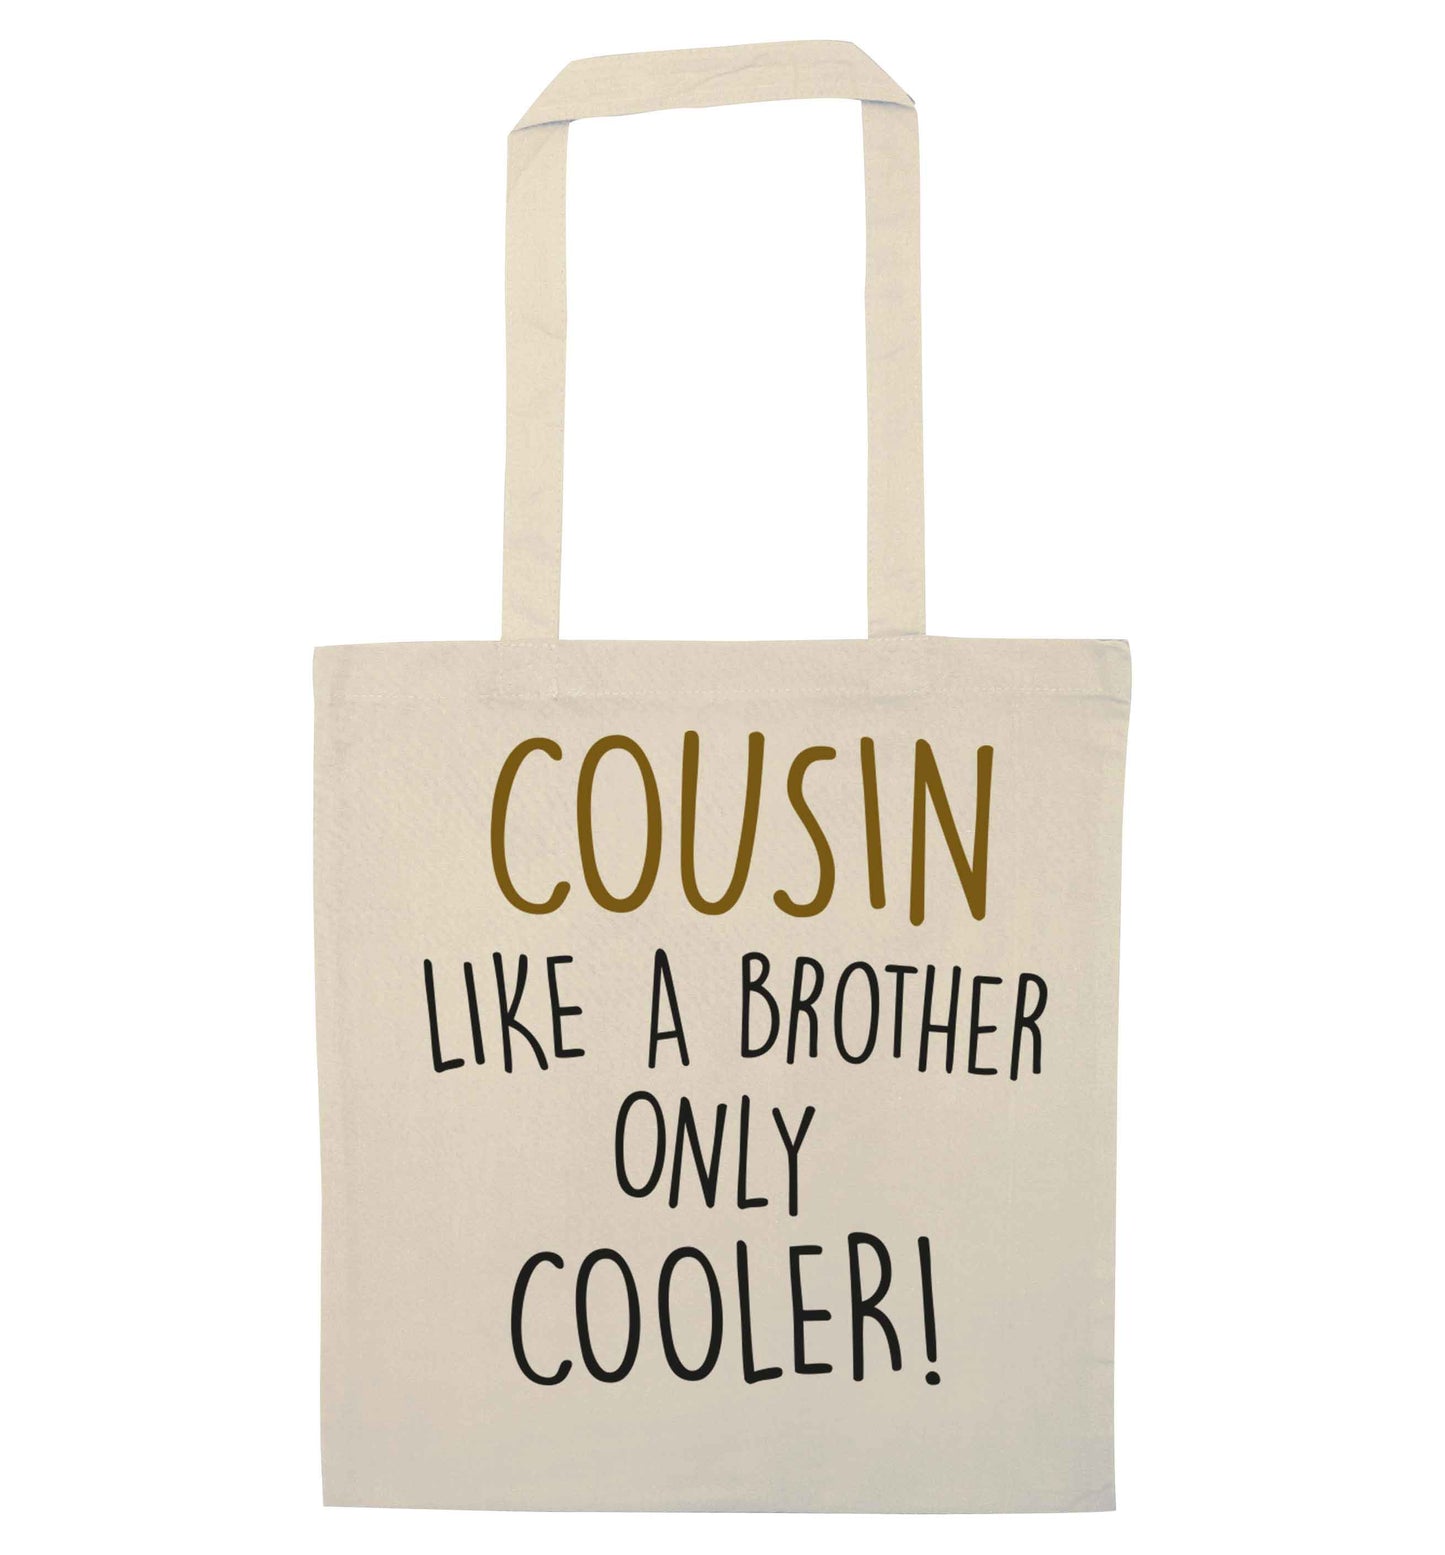 Cousin like a brother only cooler natural tote bag